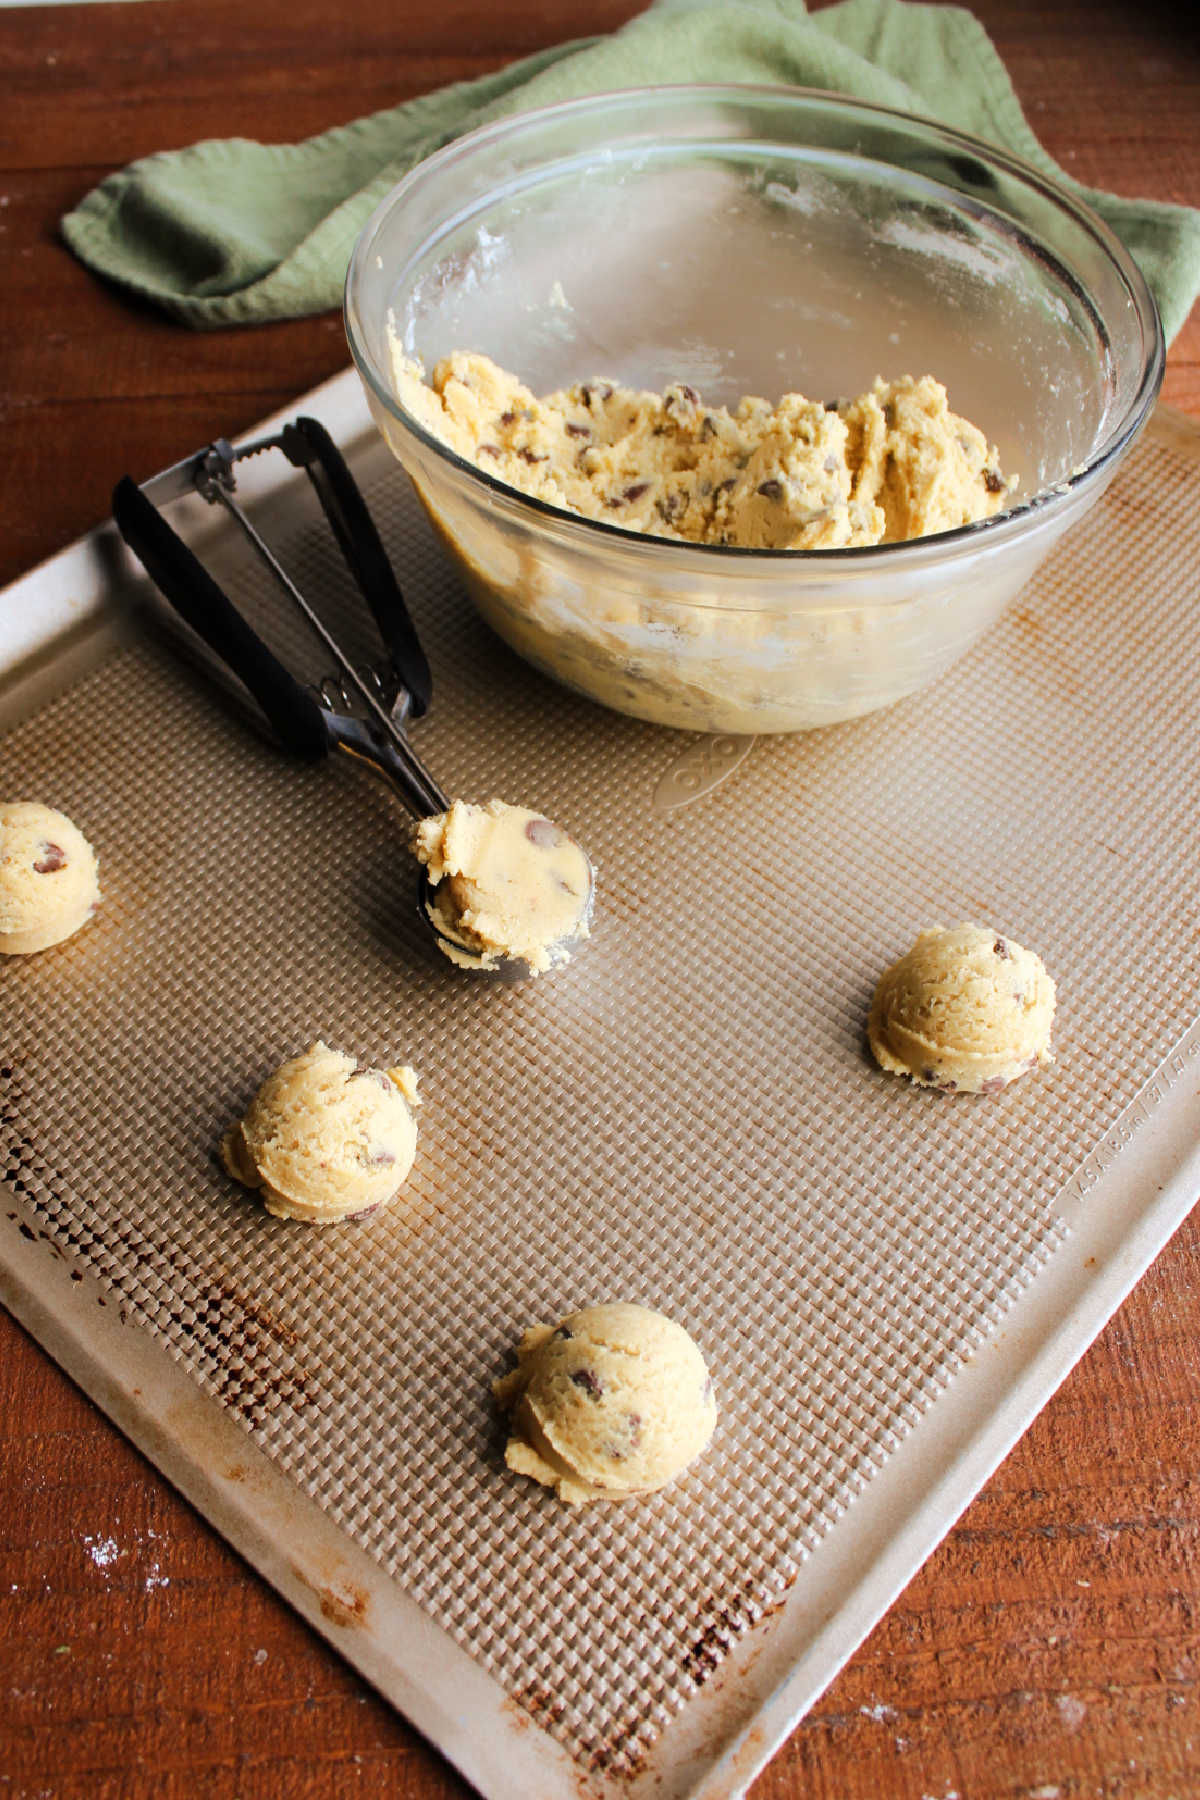 Scooping chilled chocolate chip cookie dough onto cookie sheet to bake.